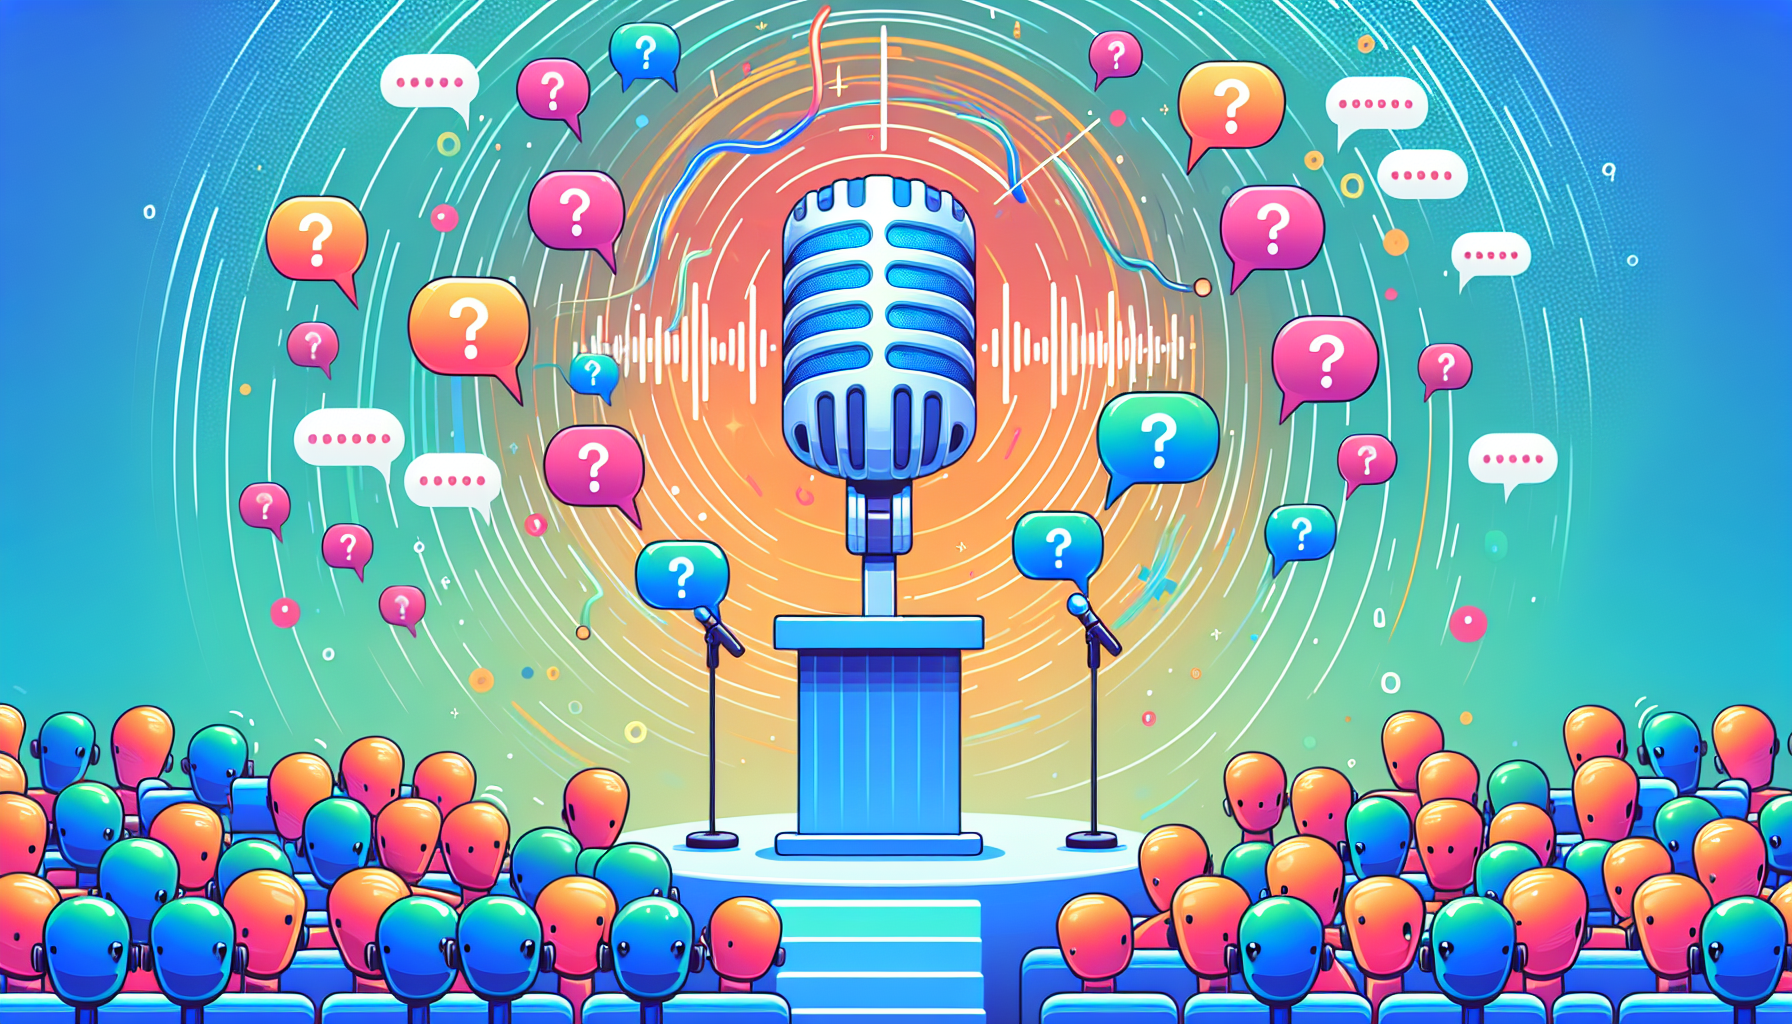 A microphone giving a speech with a robotic voice to a crowd of microphones with speech bubbles filled with question marks.